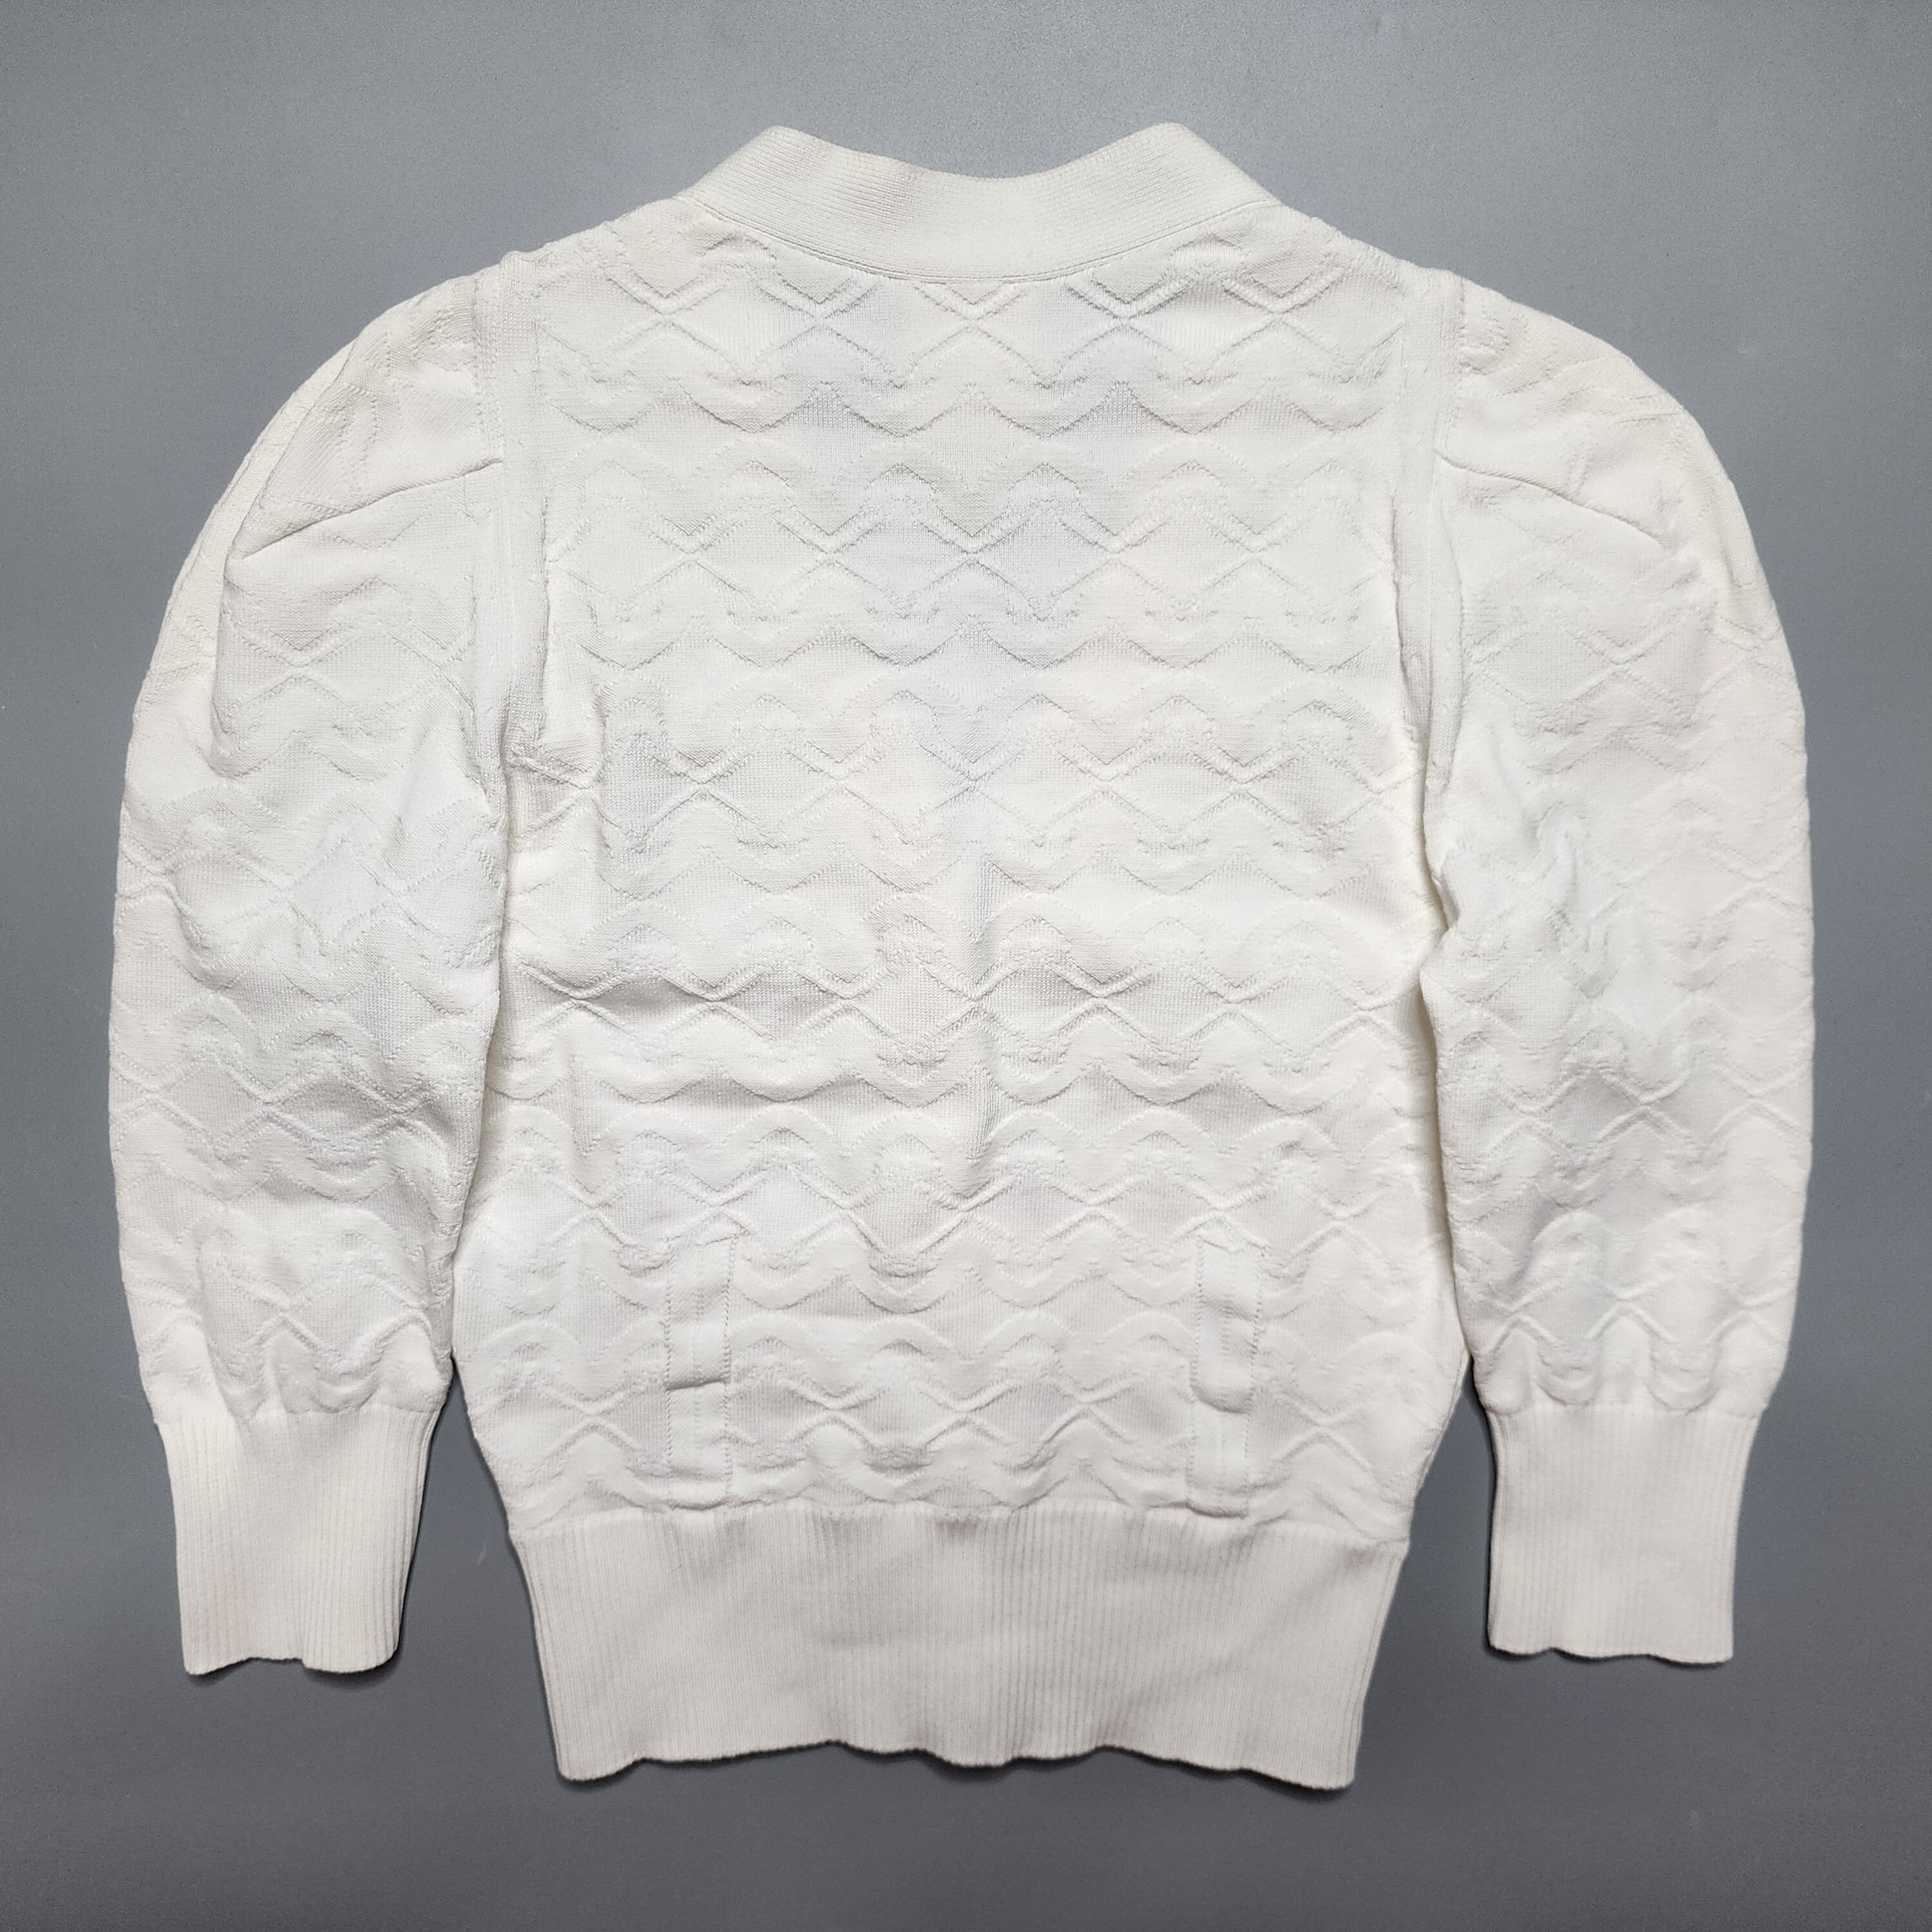 Chanel - Pre-Spring 2014 - White Knit 3/4 Sleeve Cardigan - 2